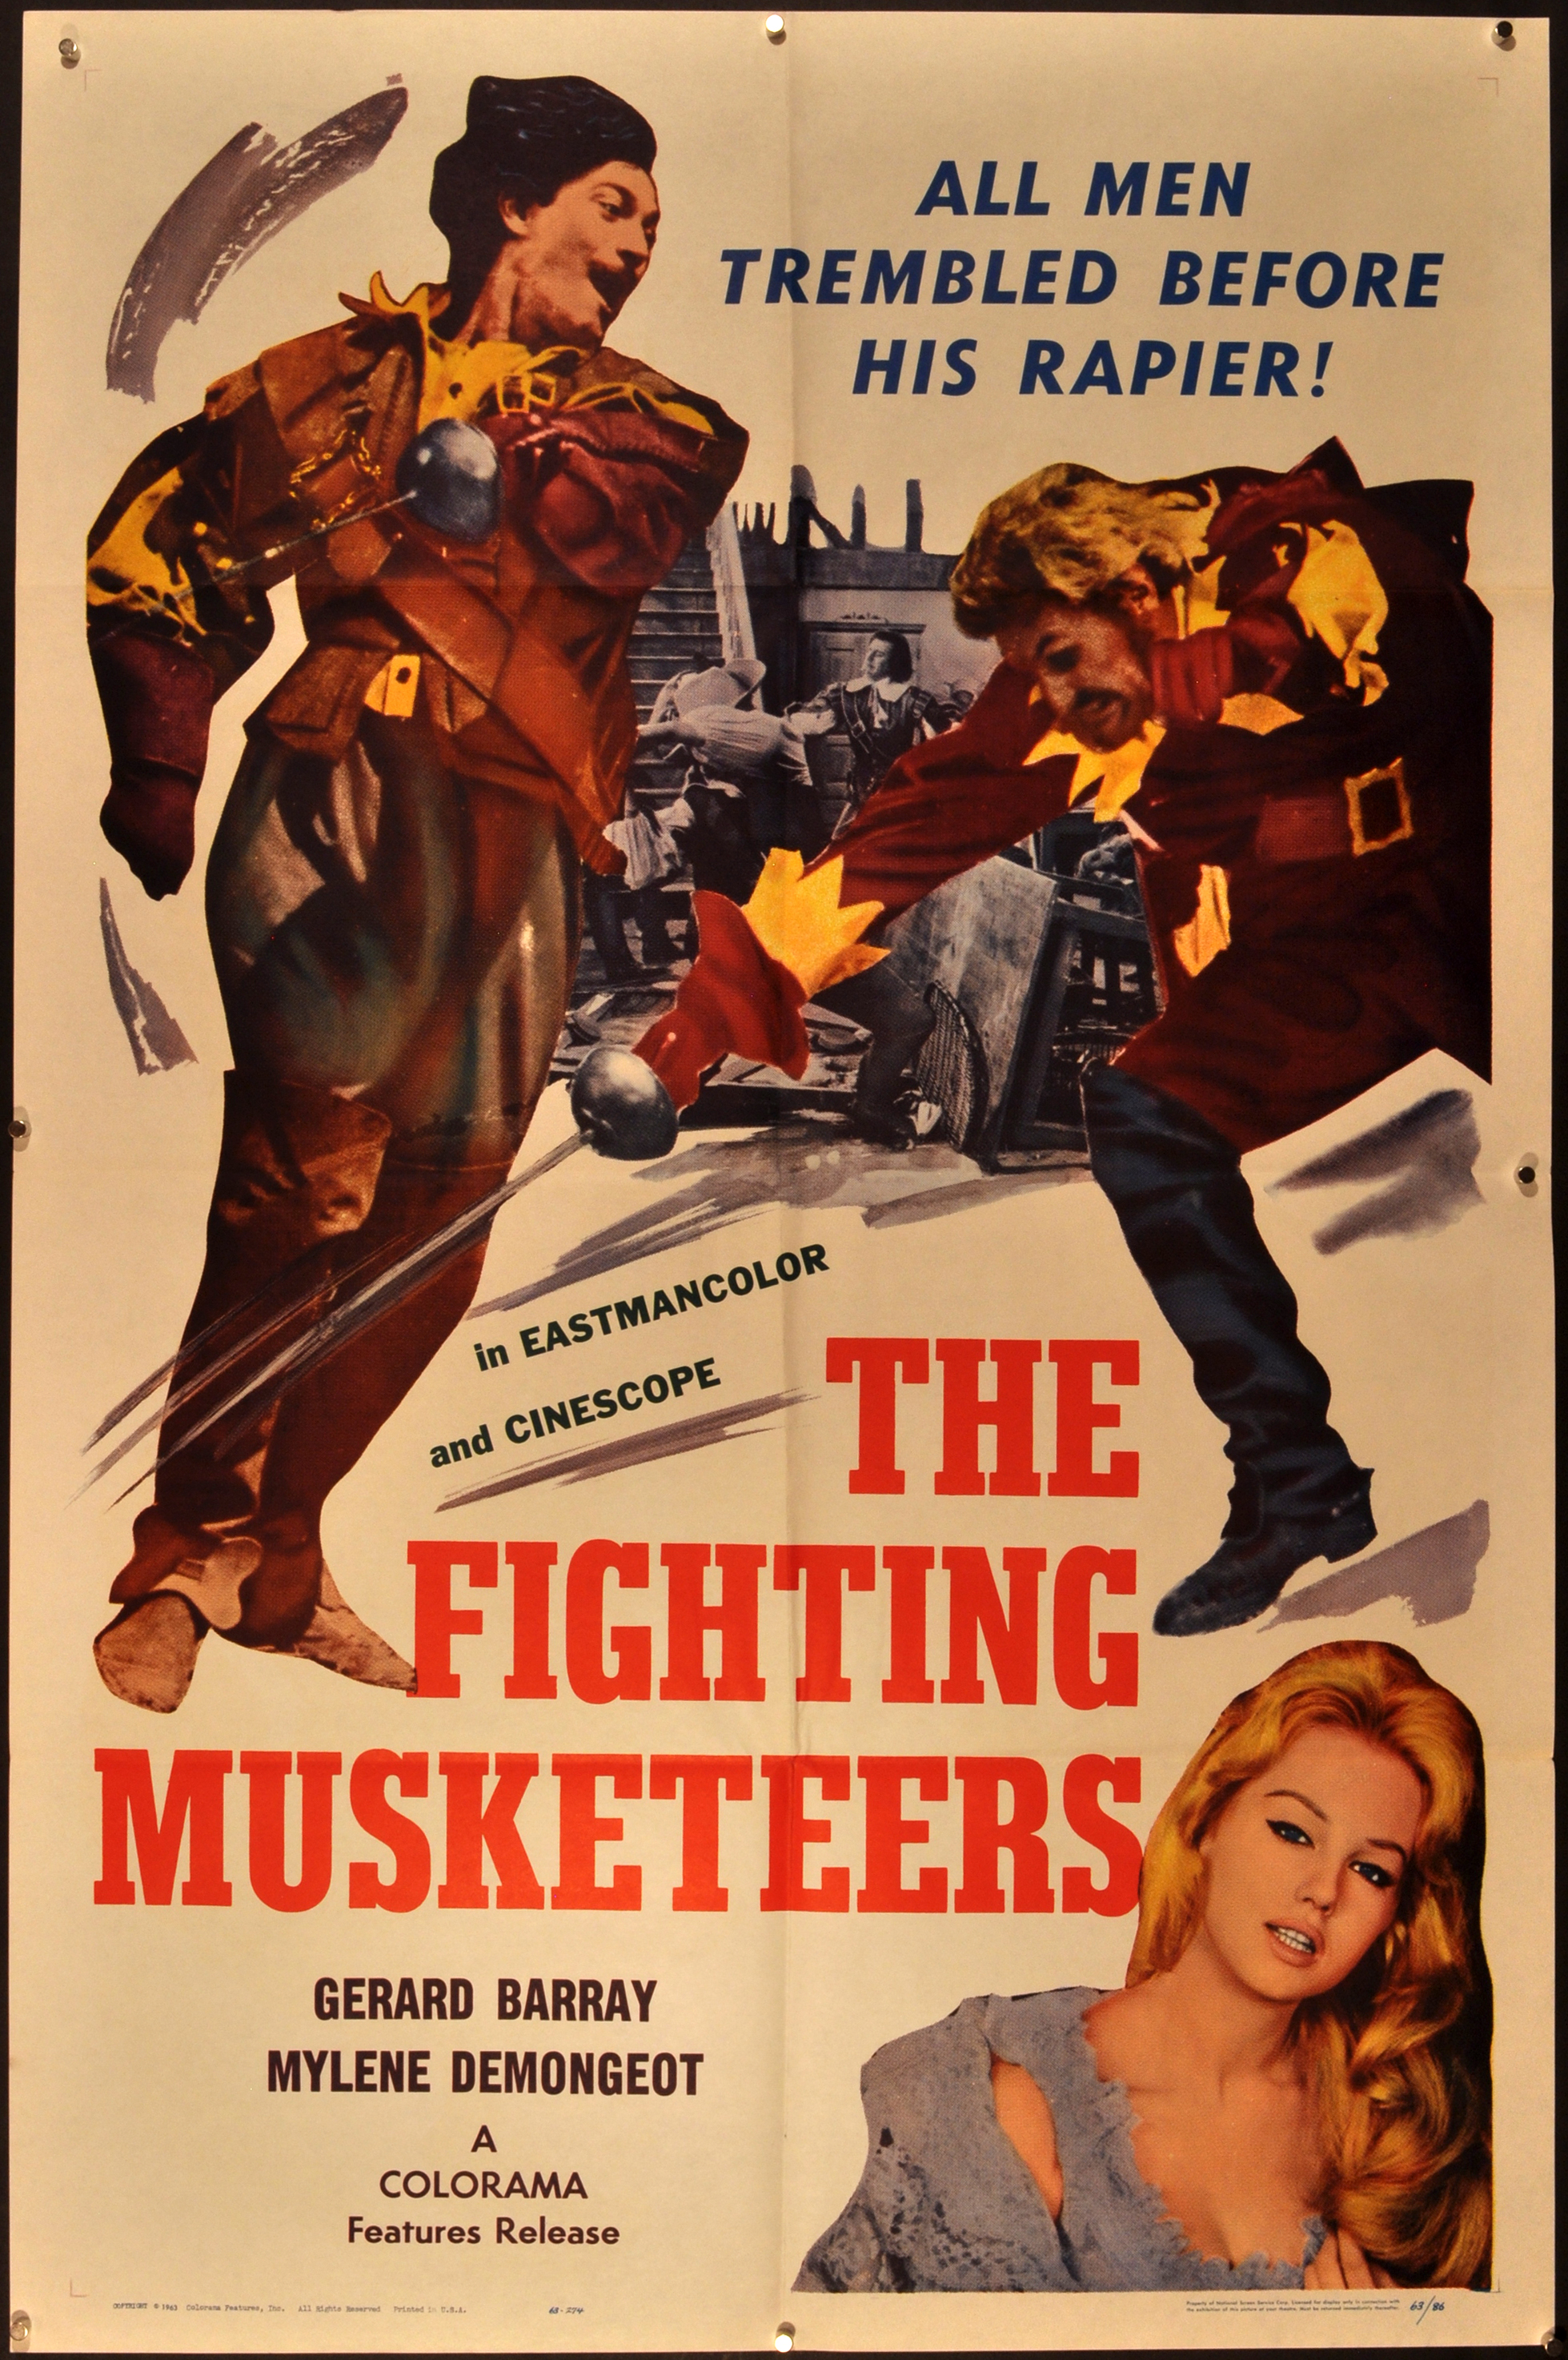 The Fighting Musketeers